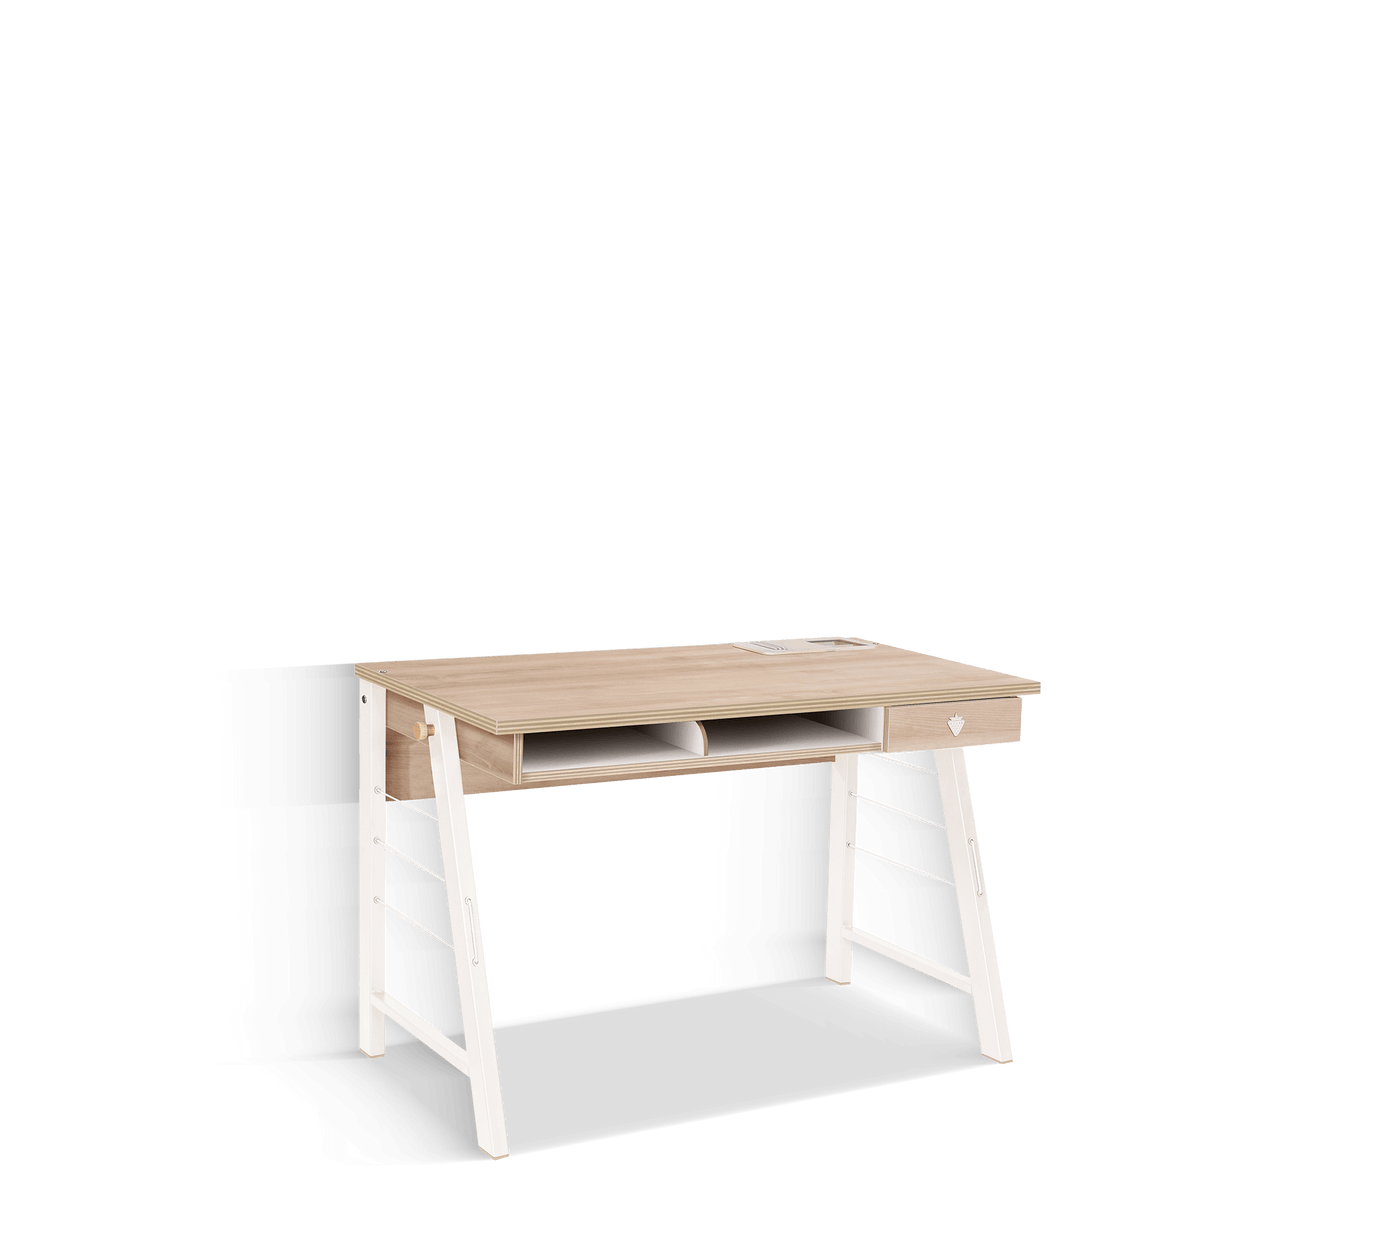 Duo Medium Study Desk - ON ORDER ONLY